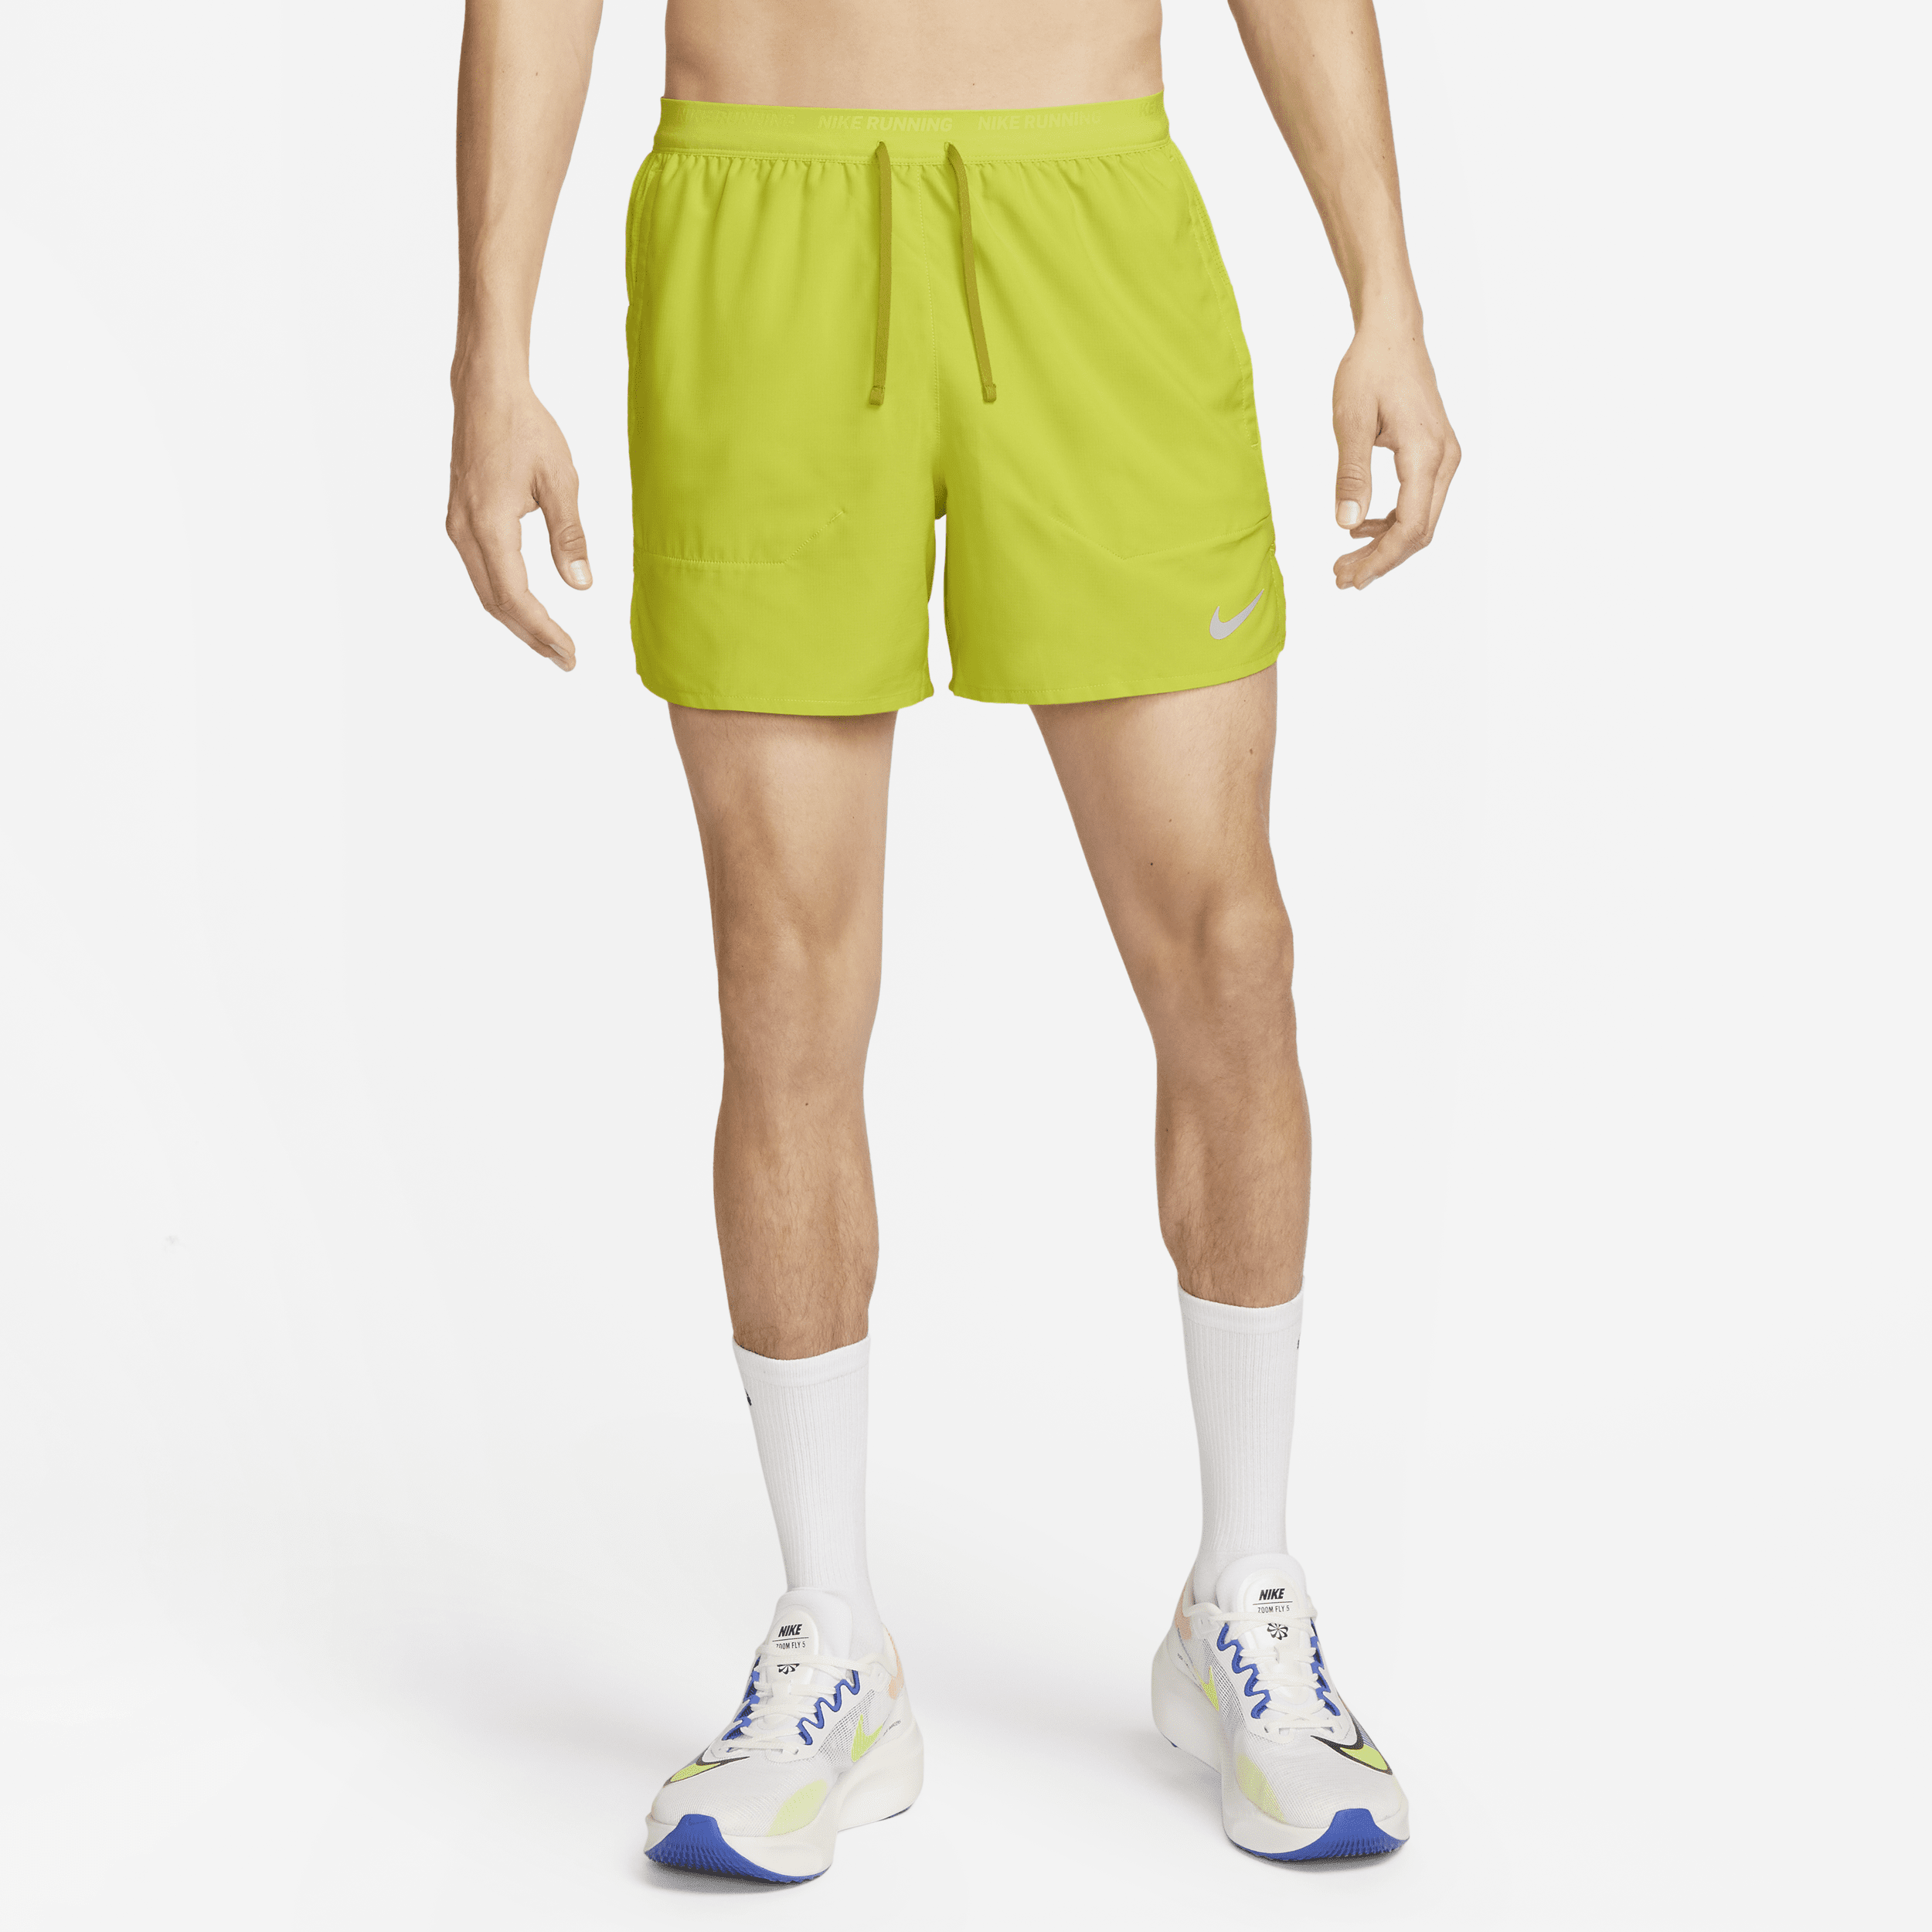 NIKE MEN'S STRIDE DRI-FIT 5" BRIEF-LINED RUNNING SHORTS,1009763385